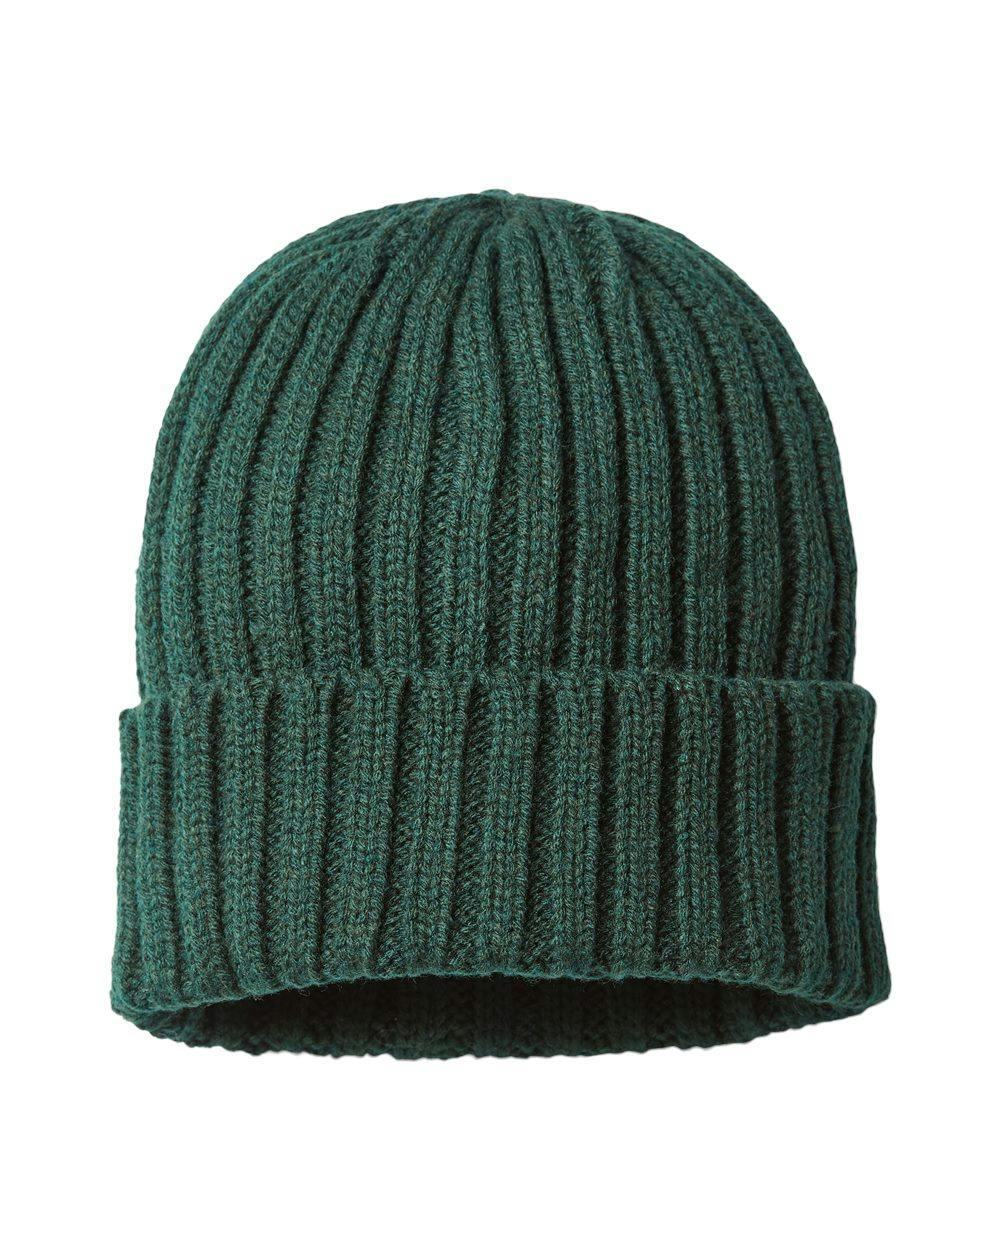 Image for Sustainable Cable Knit Cuffed Beanie - SHORE